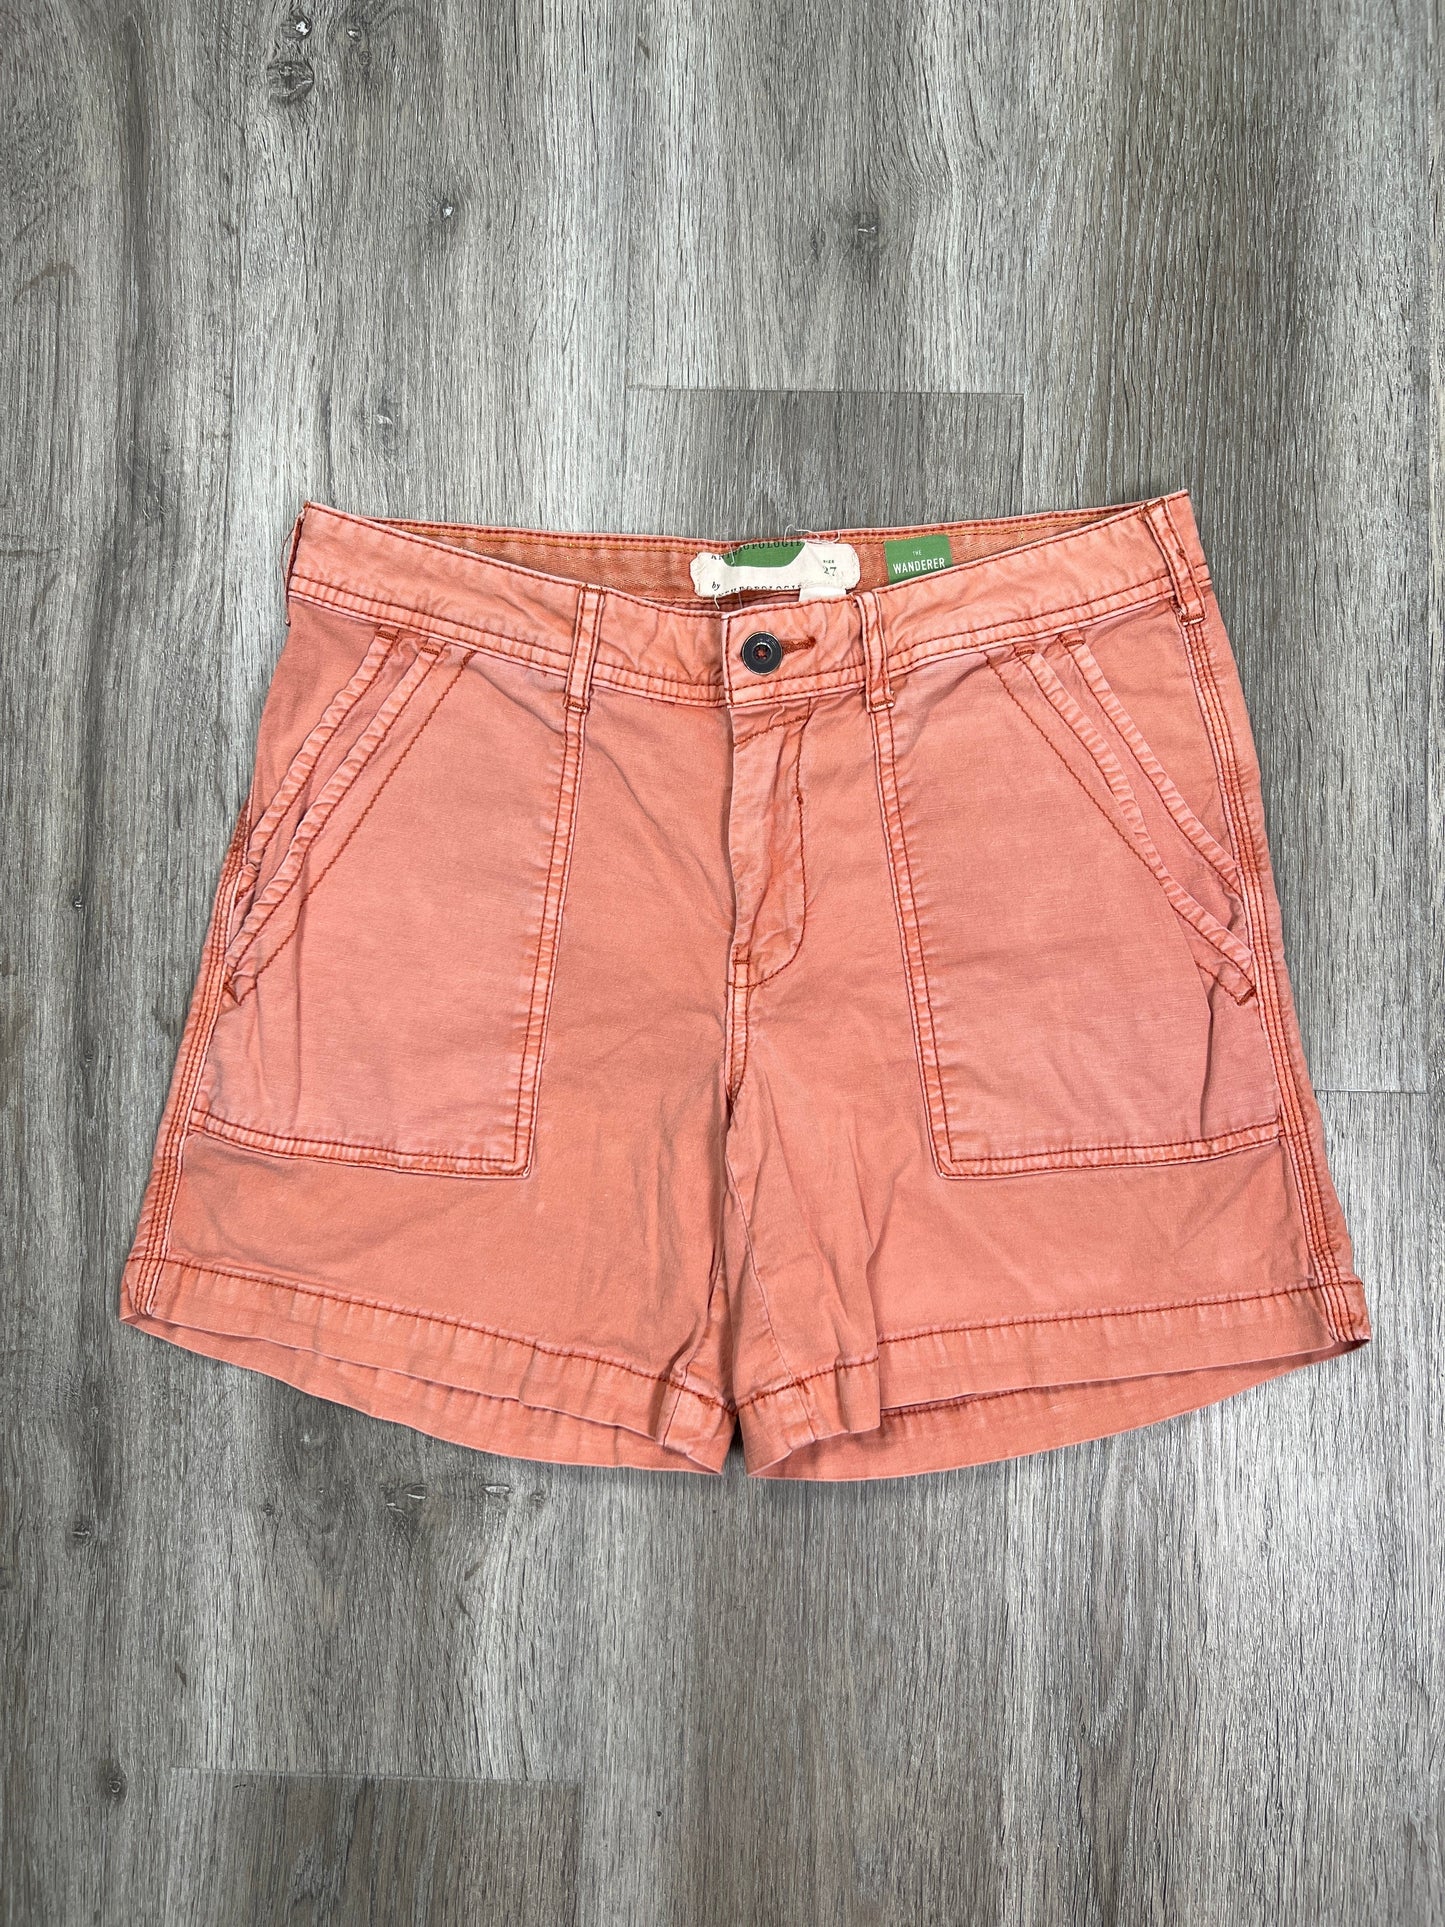 Coral Shorts Anthropologie, Size S